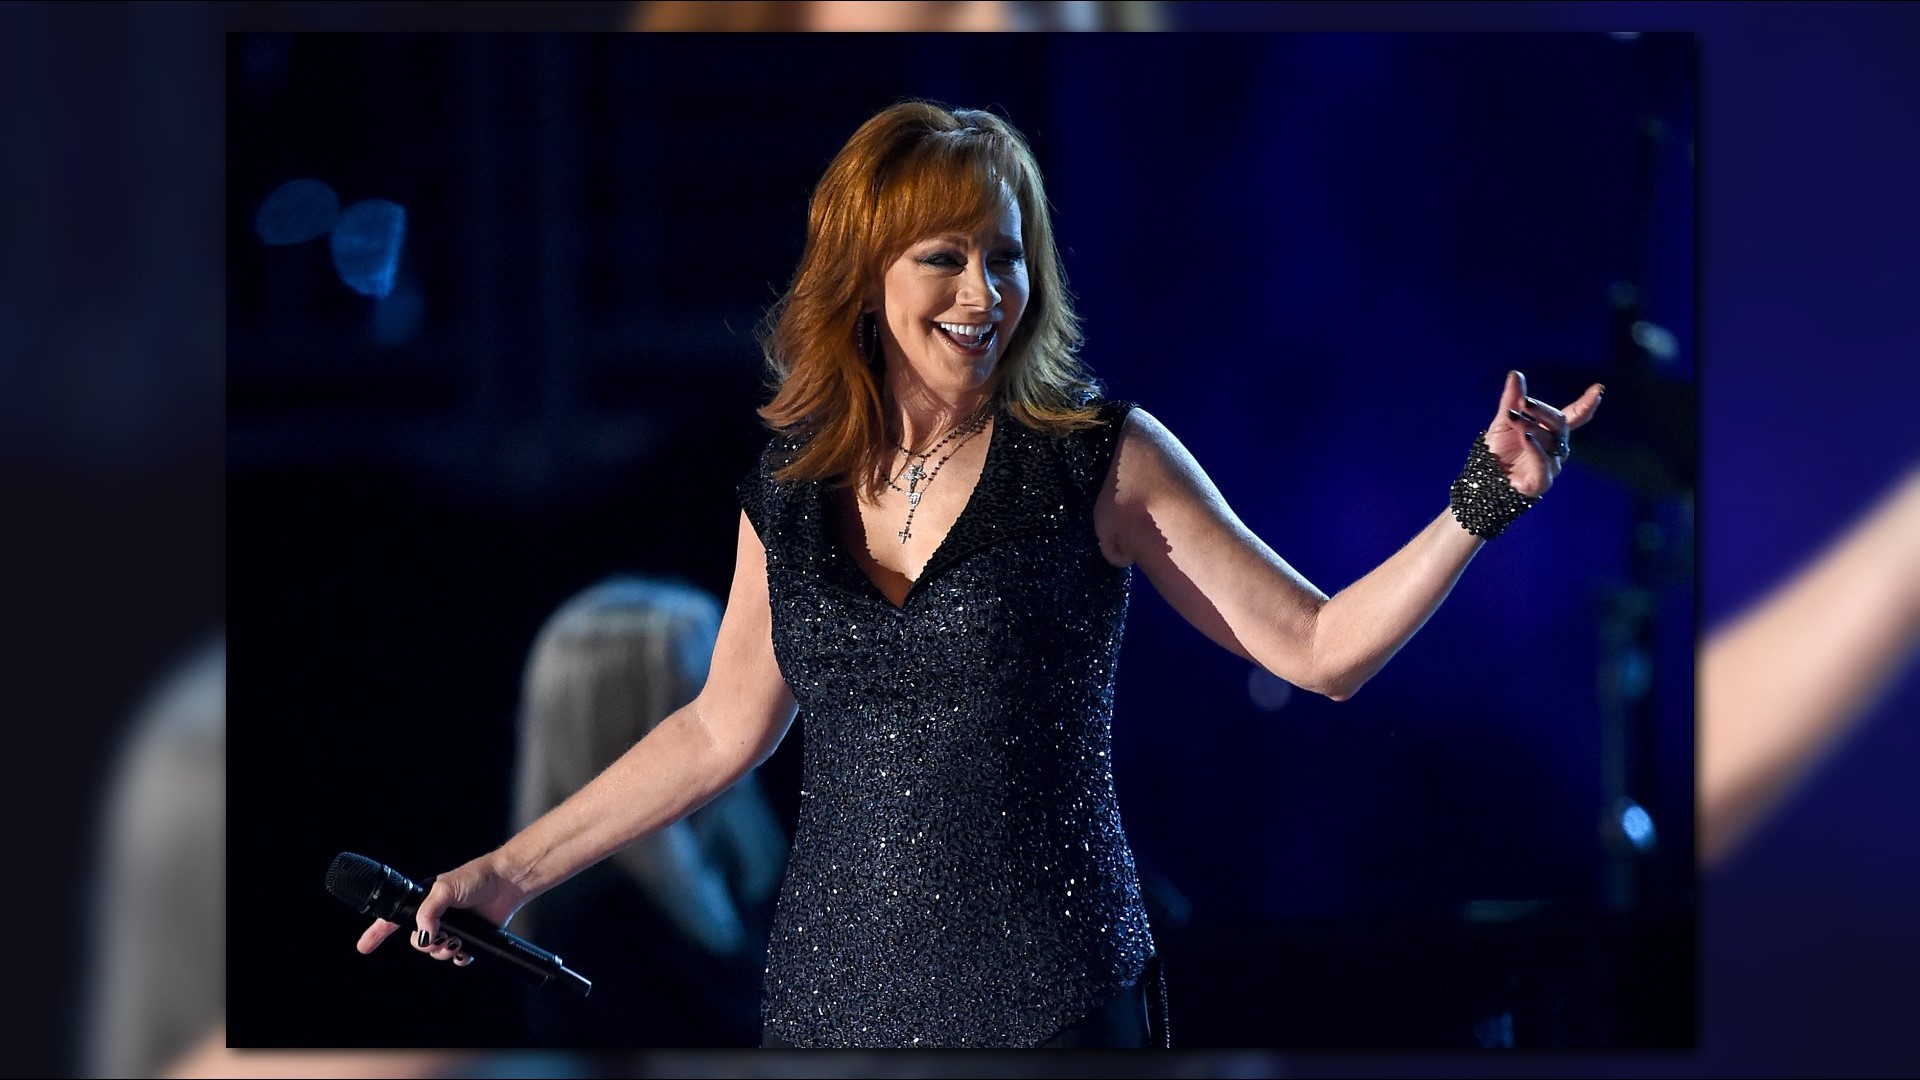 Iconic entertainer and 16-time ACM Award winner Reba McEntire to host the 2019 ACM Awards on WFMY News 2/CBS